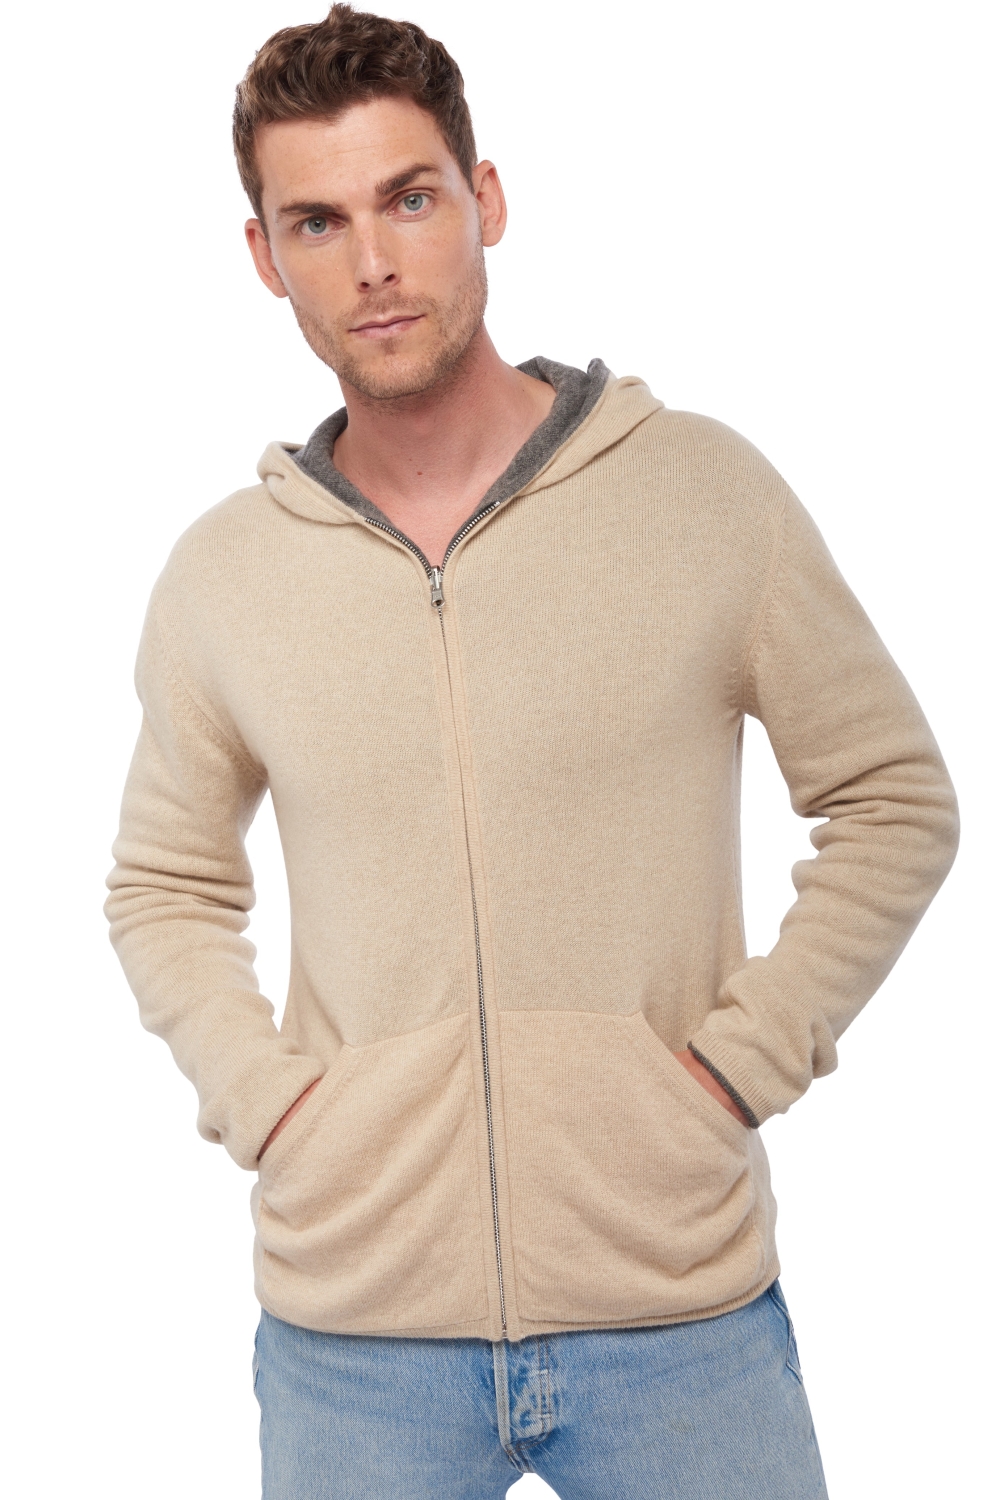 Cachemire pull homme carson marmotte chine natural beige l